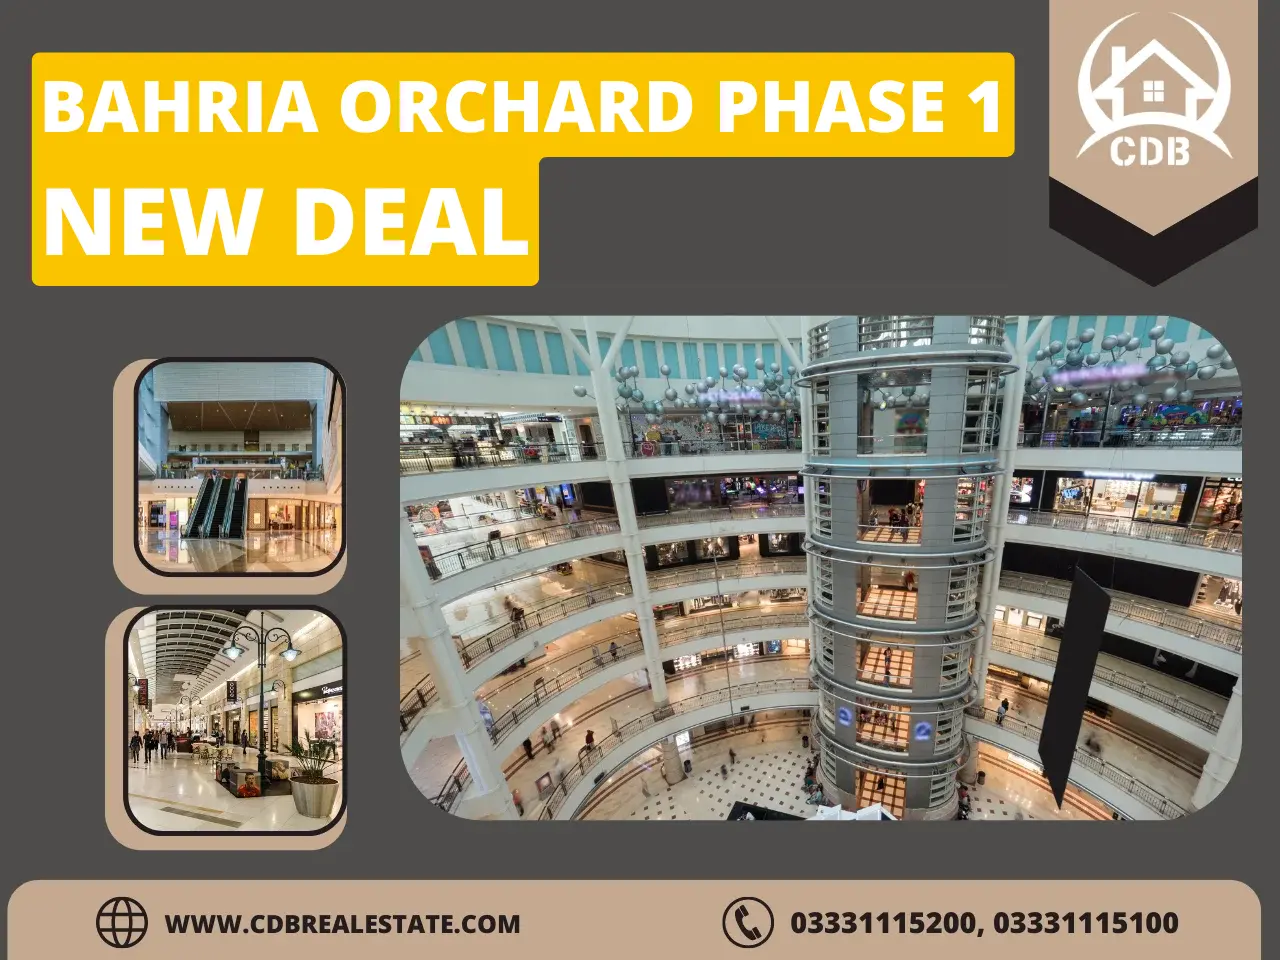 Bahria Orchard Phase 1 New Deal